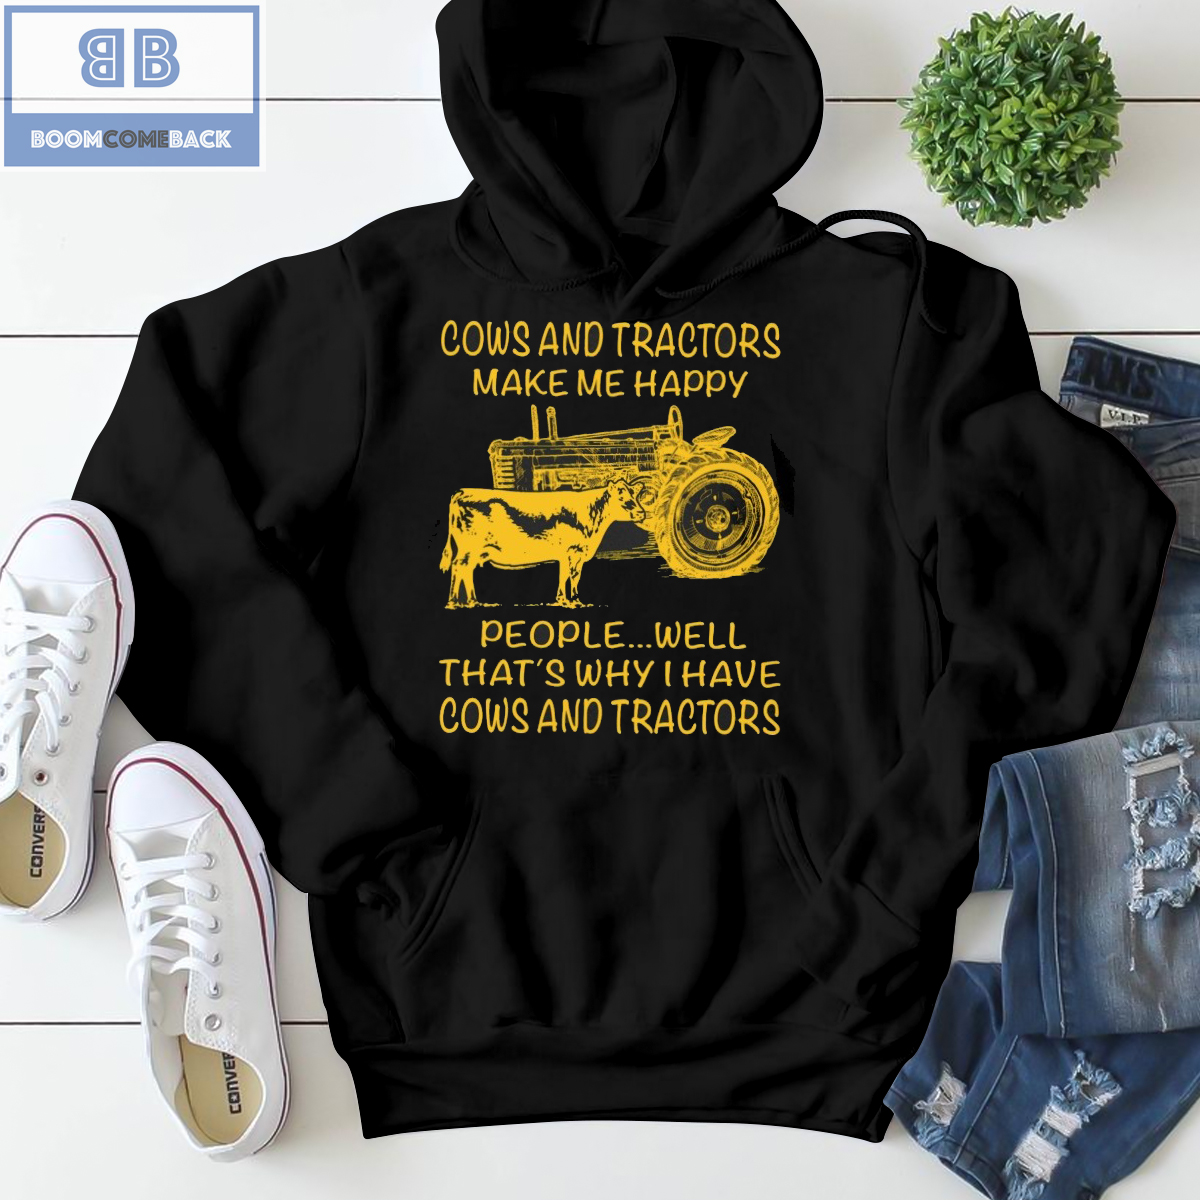 Cows And Tractors Make Me Happy People Well That's Why I have Cows And Tractors Shirt